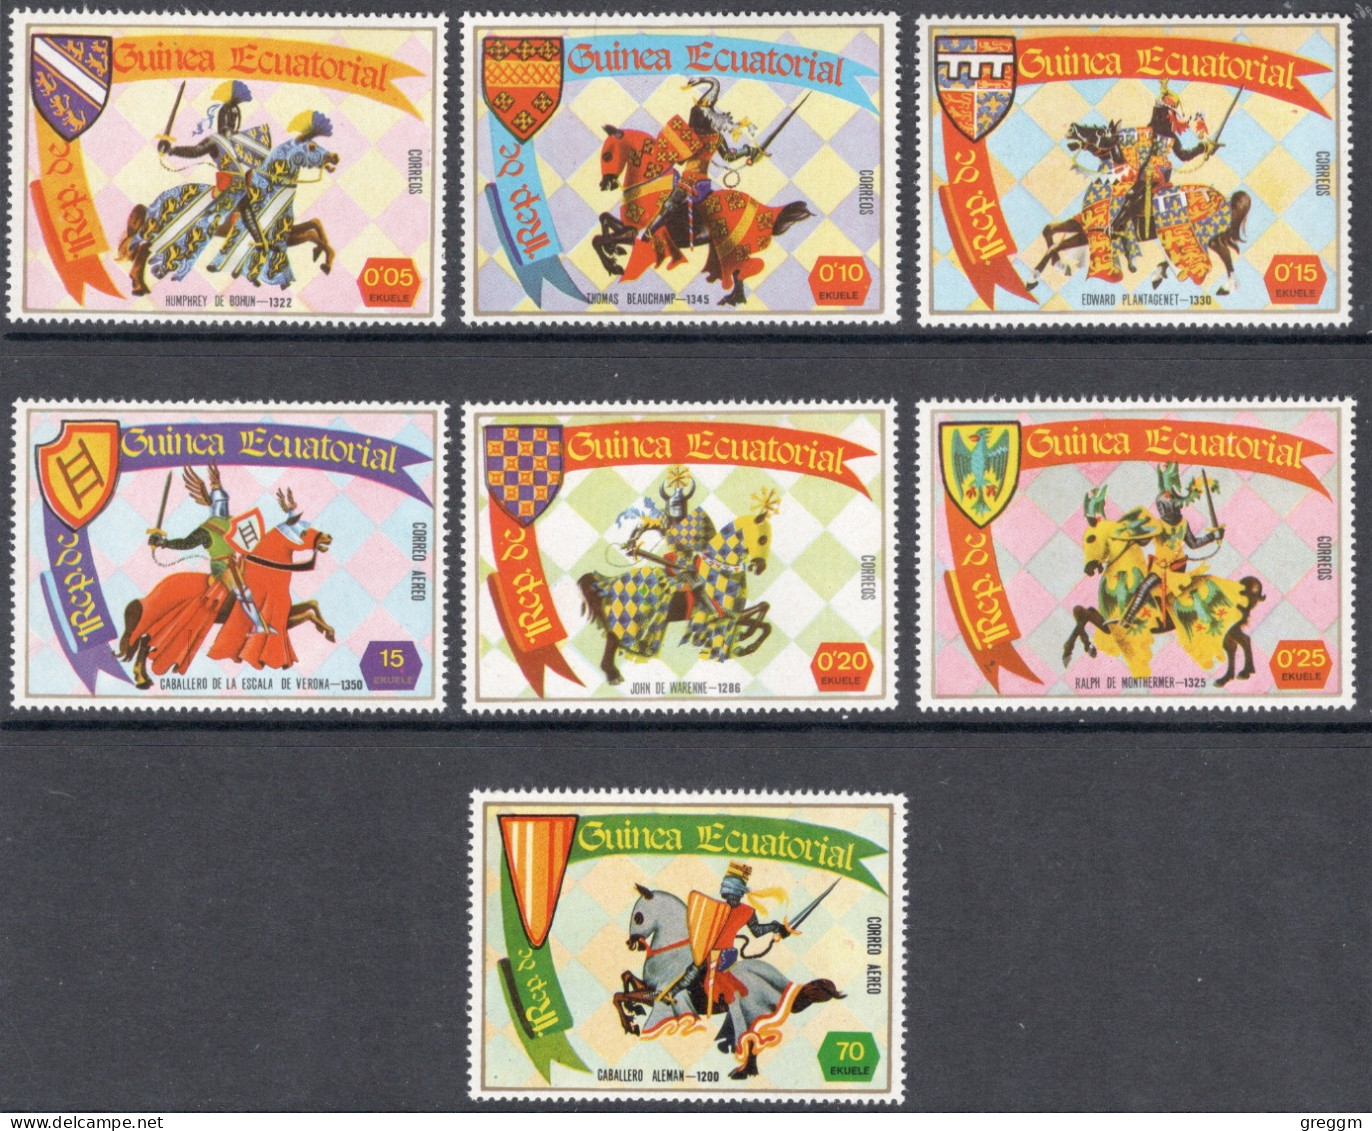 Equatorial Guinea 1978 Set Of Stamps Showing Knights In Unmounted Mint Condition - Guinée Equatoriale